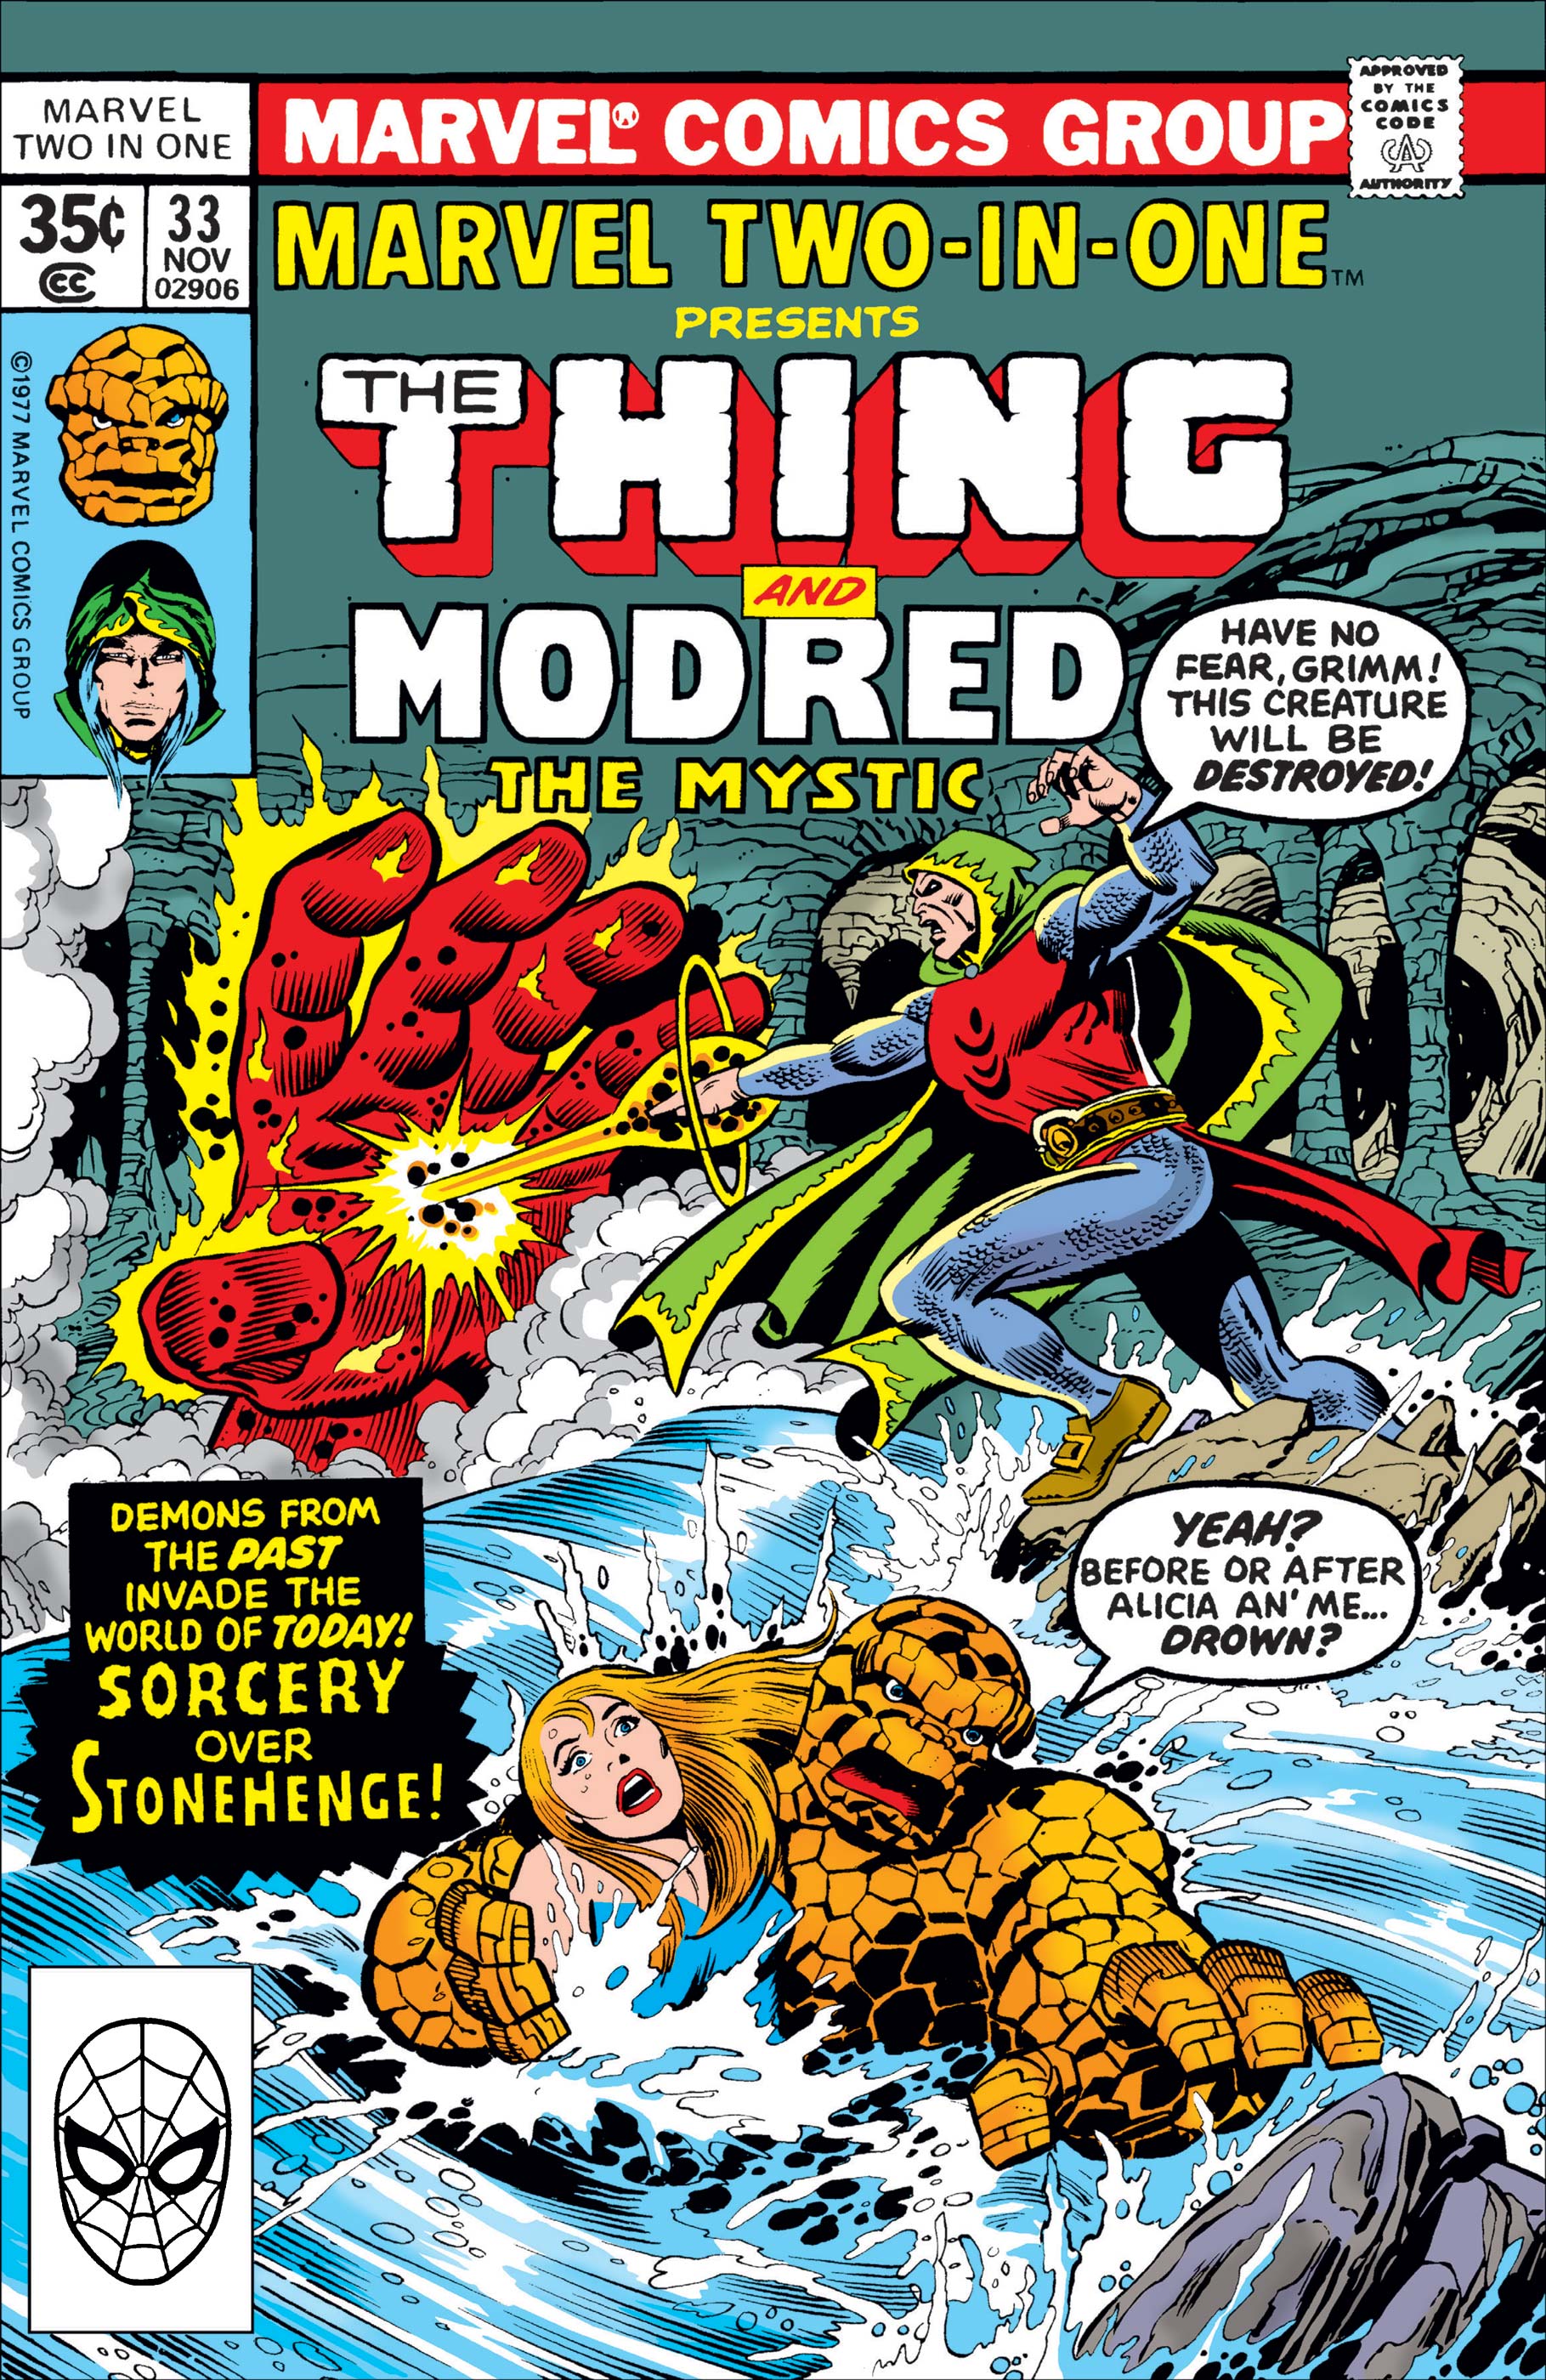 Marvel Two-in-One (1974) #33